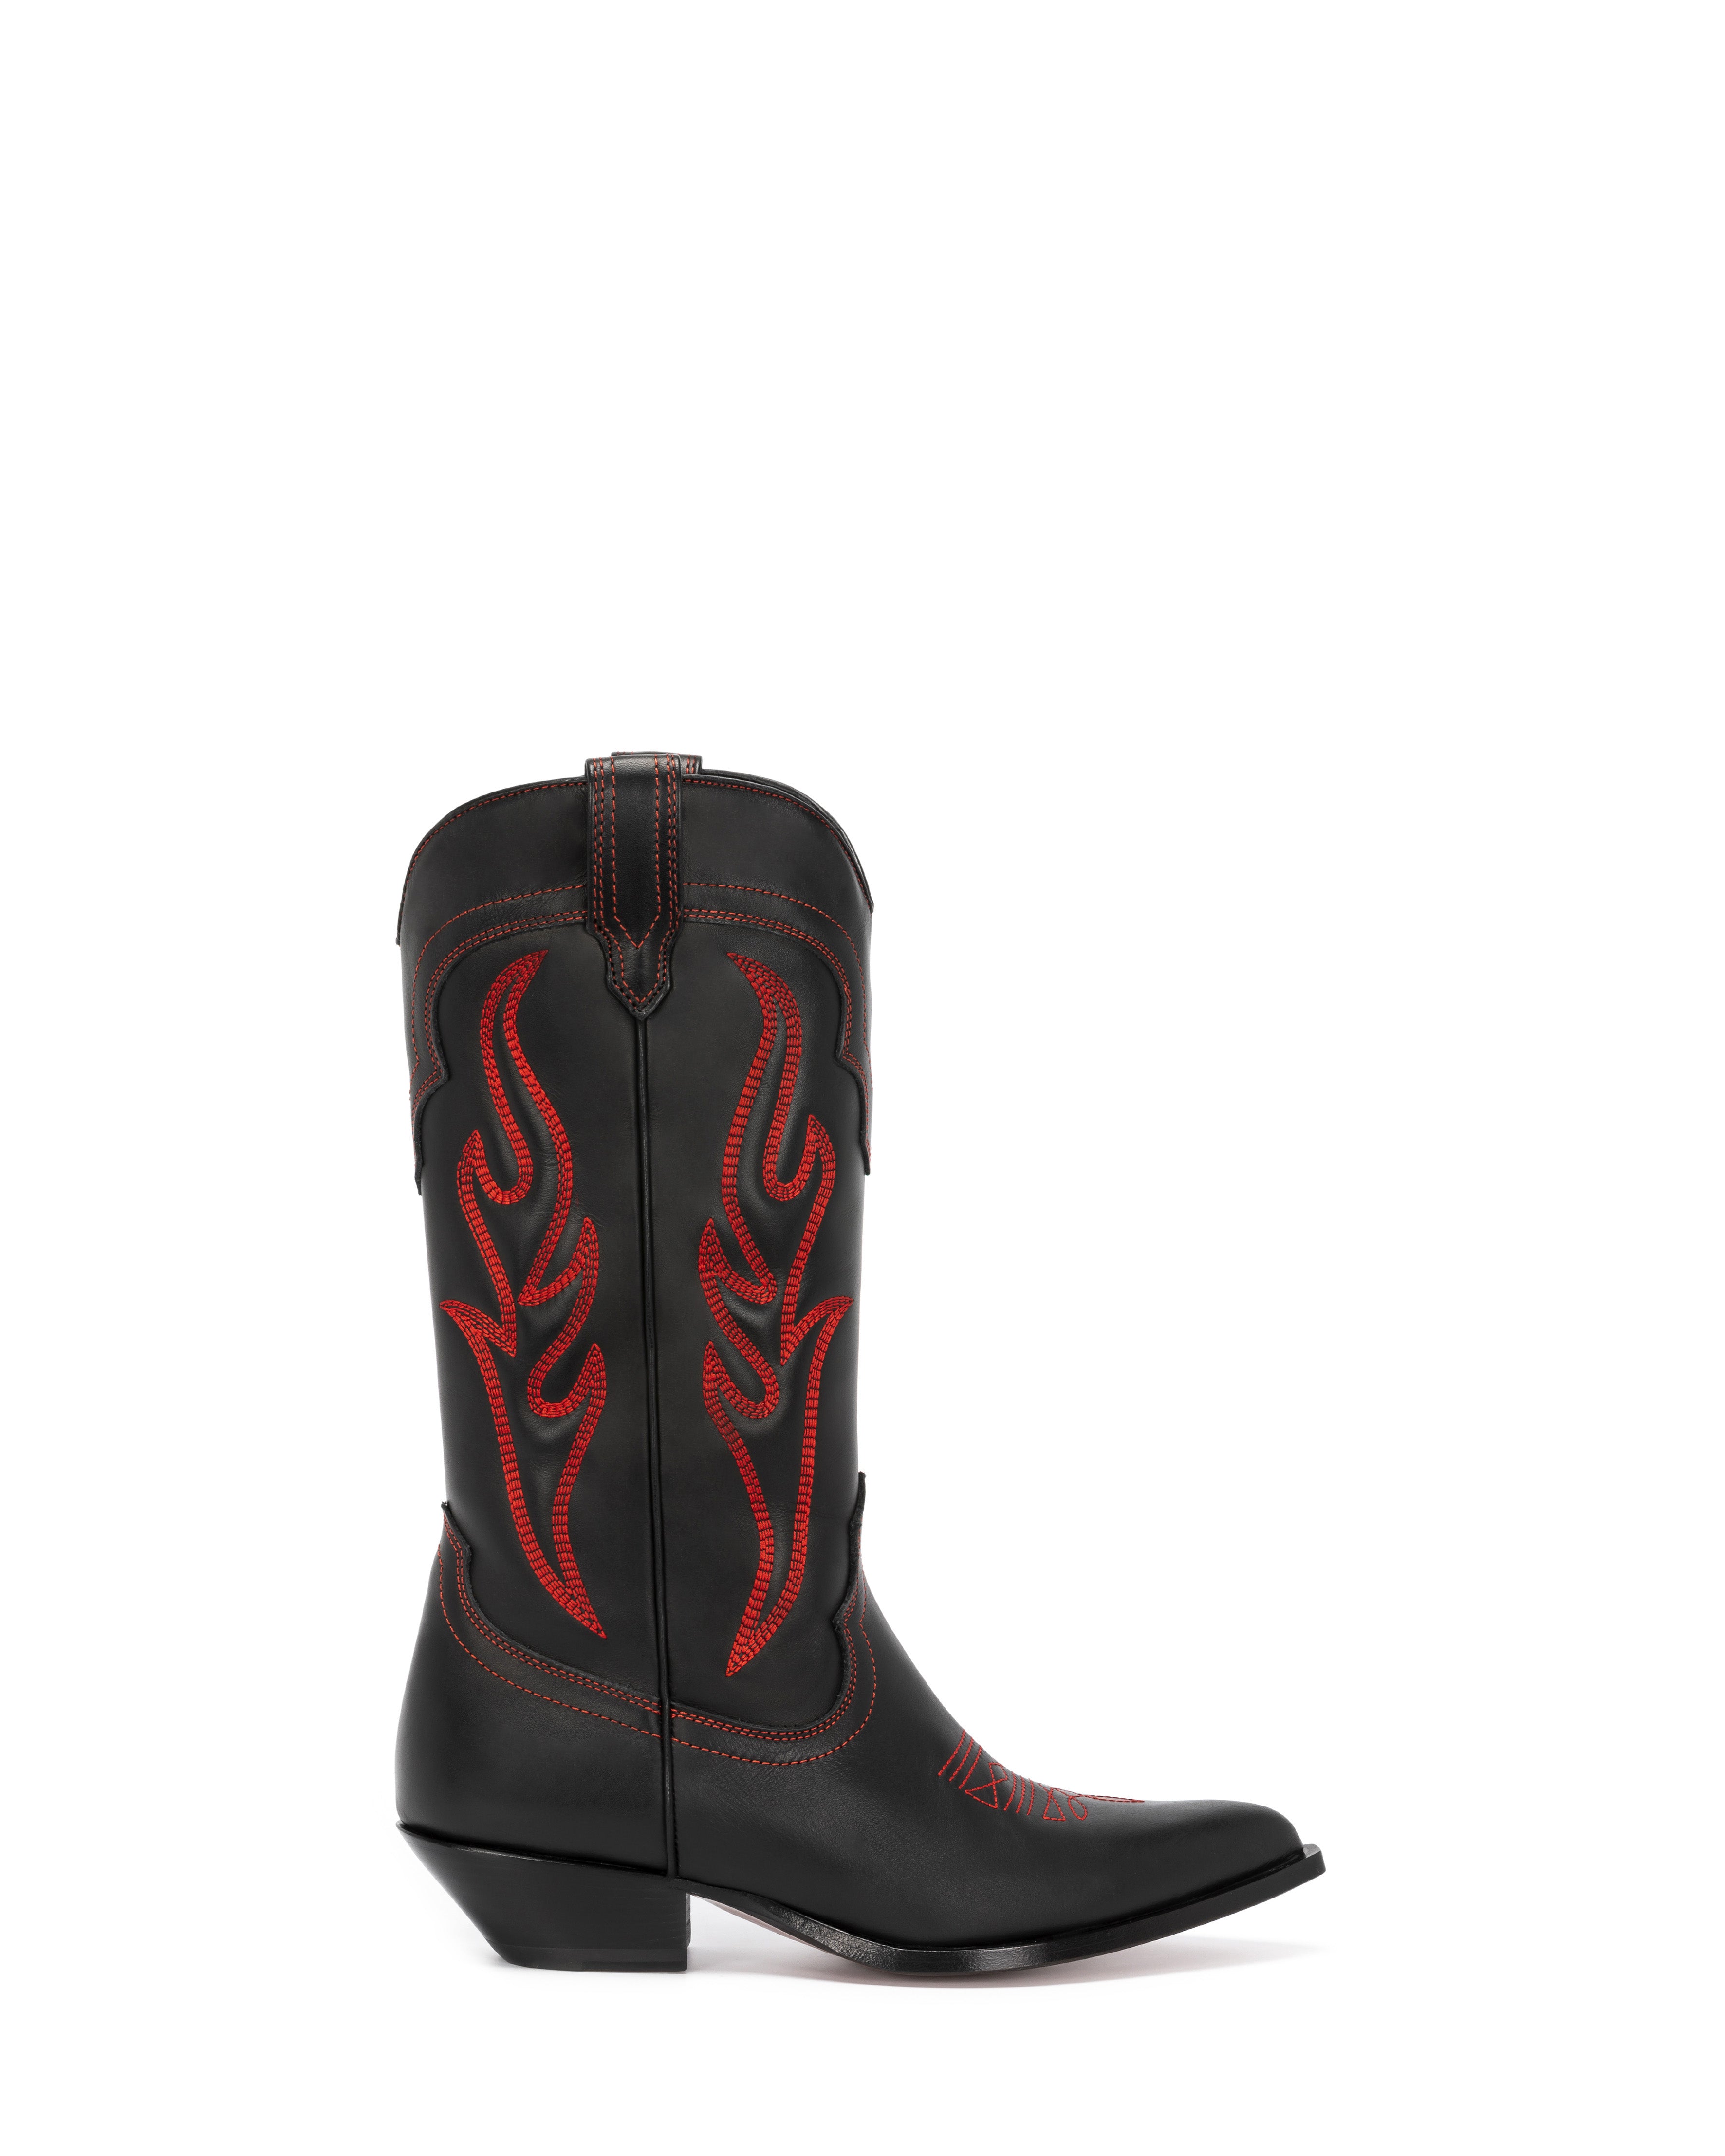 SANTA FE Women's Cowboy Boots in Black Calfskin | Red Embroidery